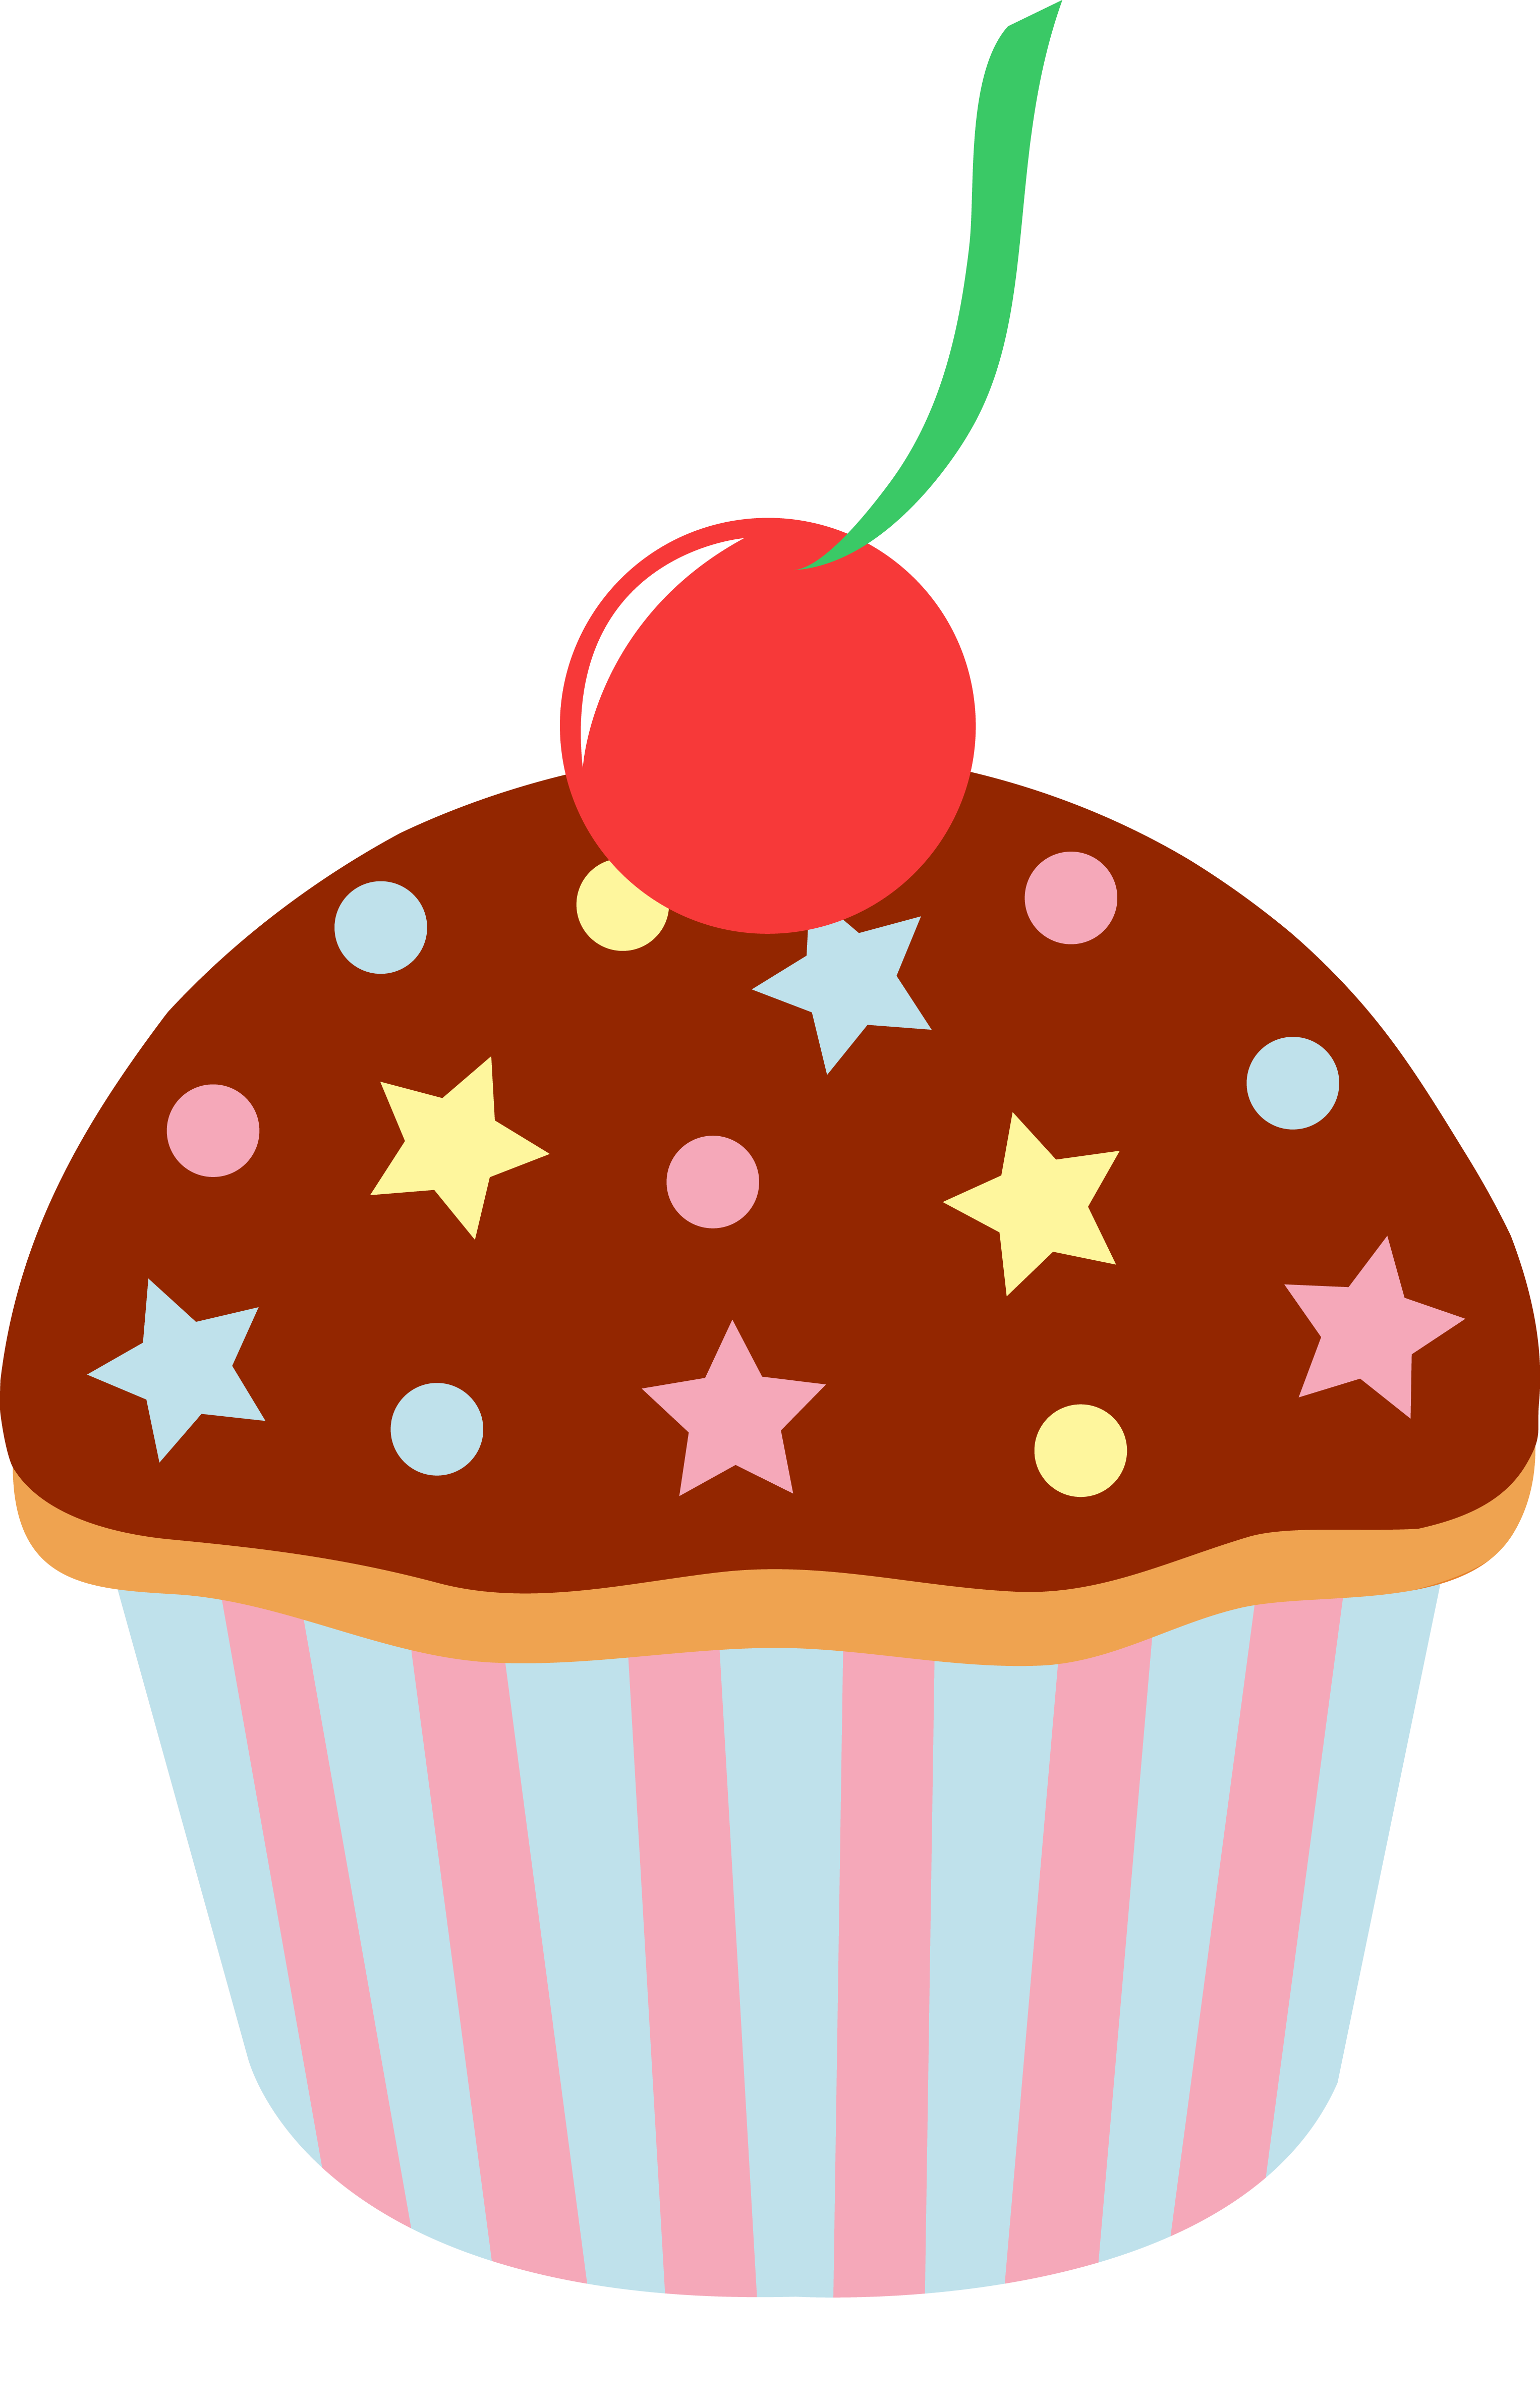 Ladybugs clipart cupcake. Come prepared to face